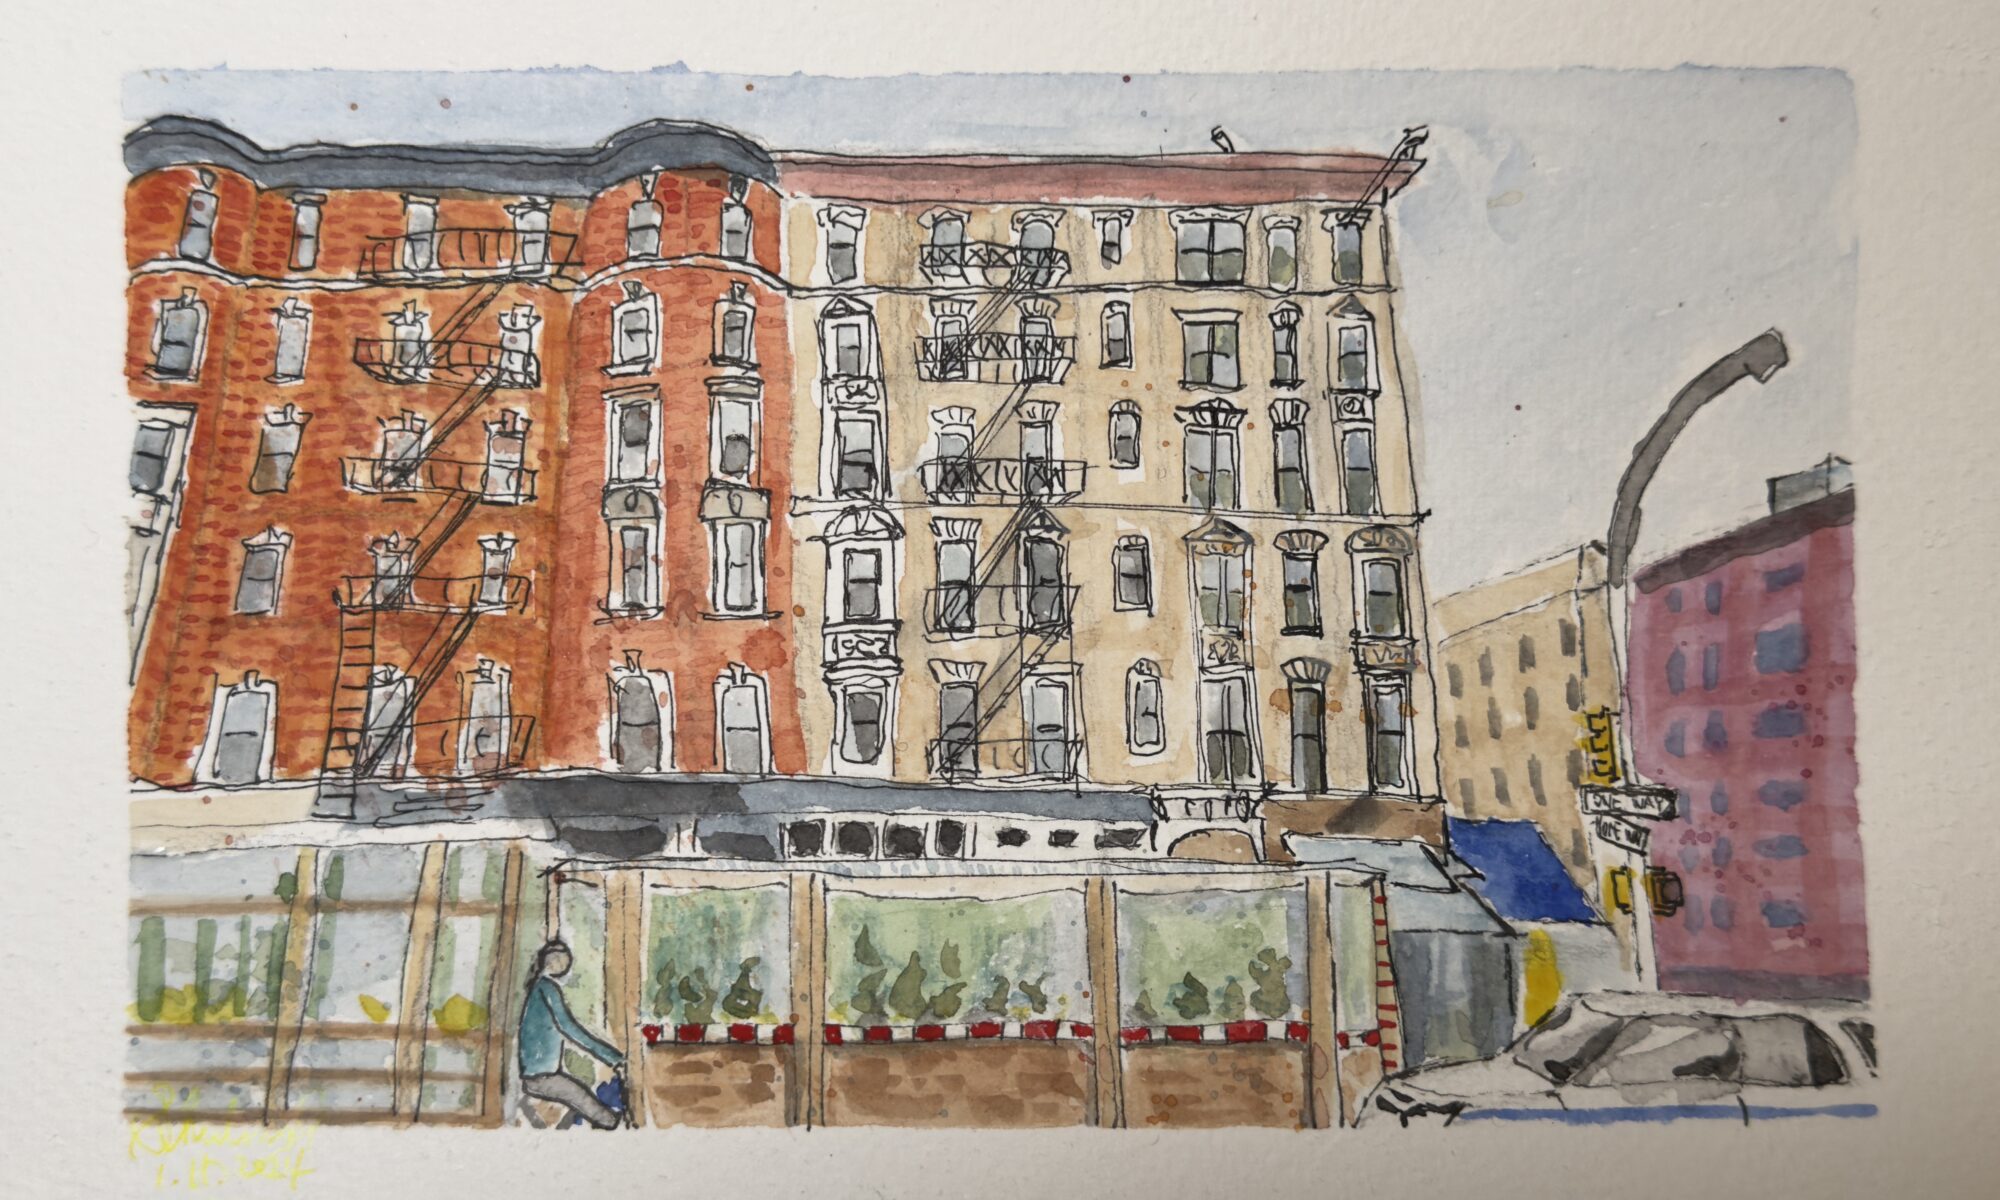 Watercolor painting of the street in East Village, NYC